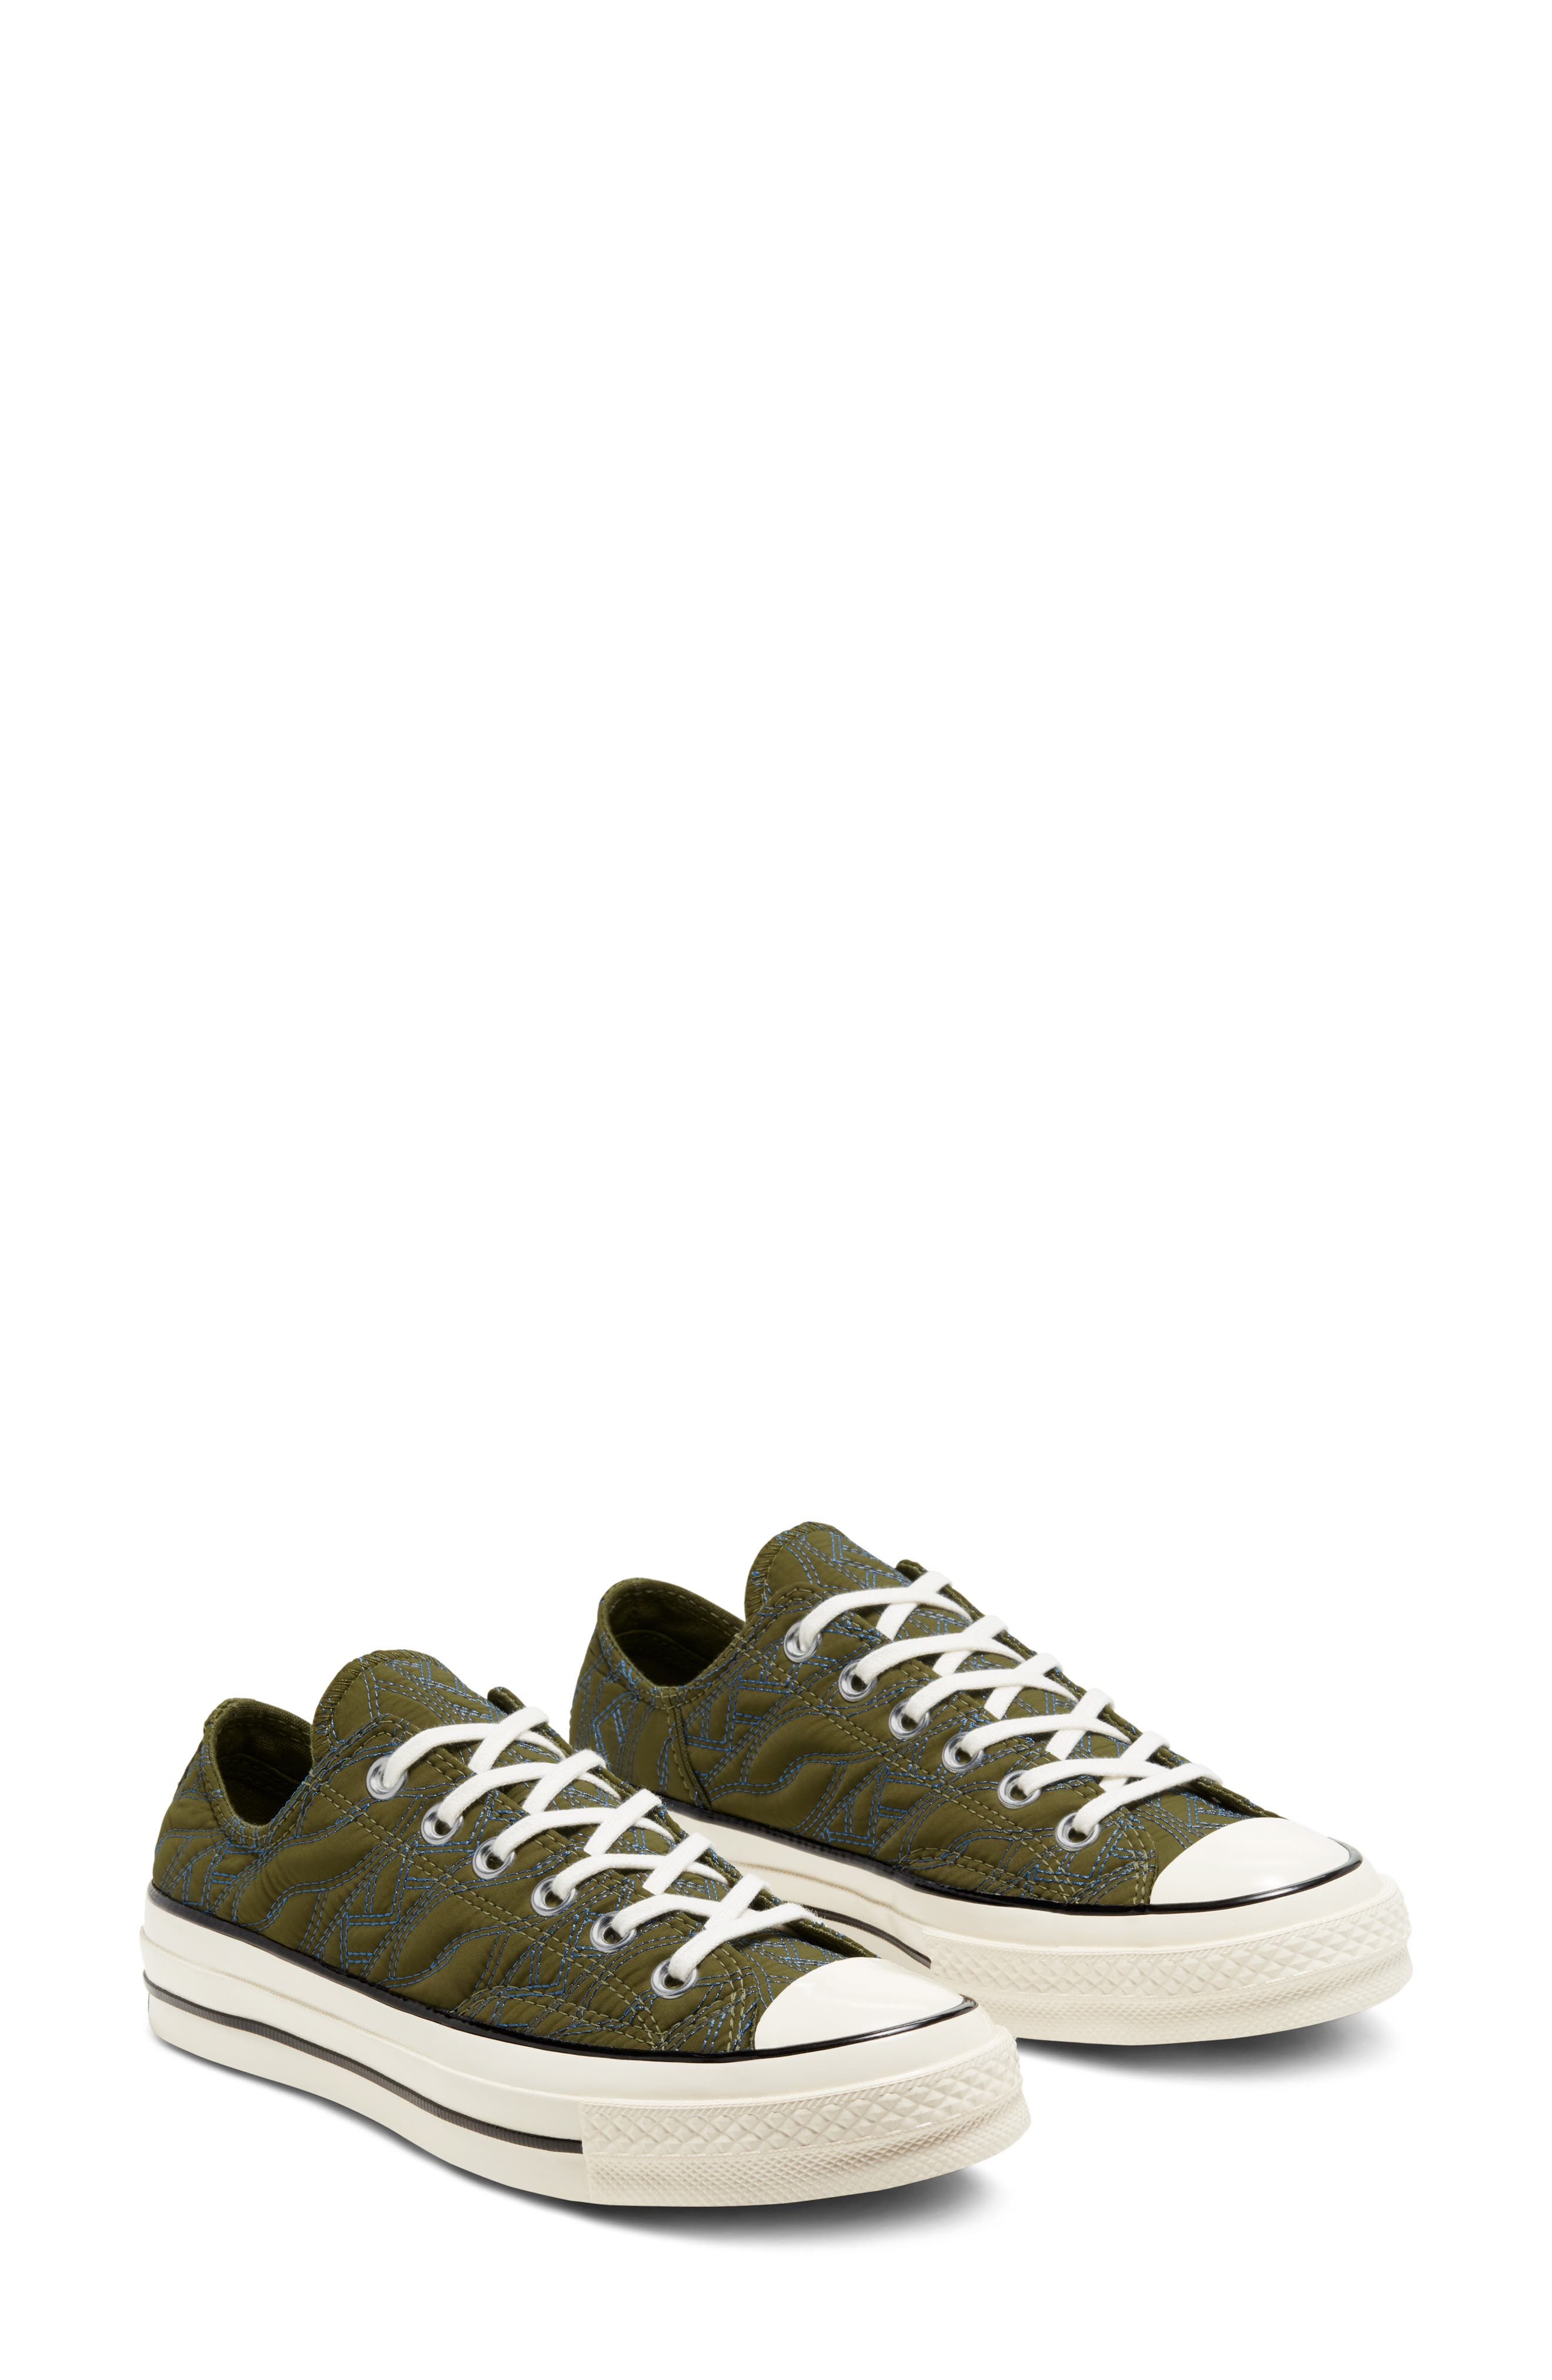 converse chuck taylor all star quilted ox w